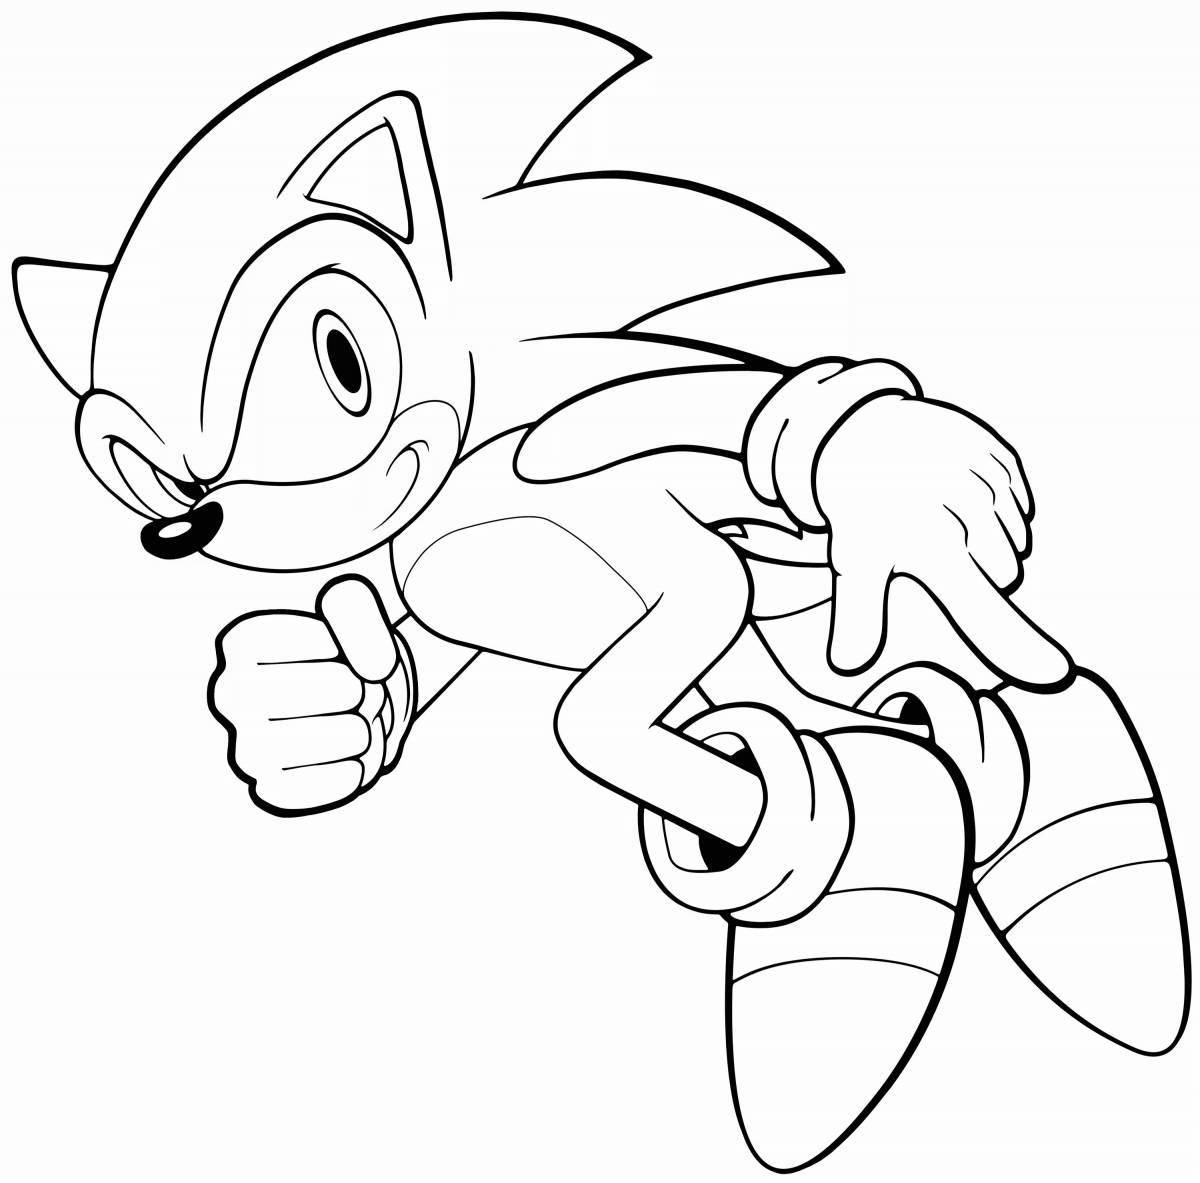 Sonic the hedgehog live coloring